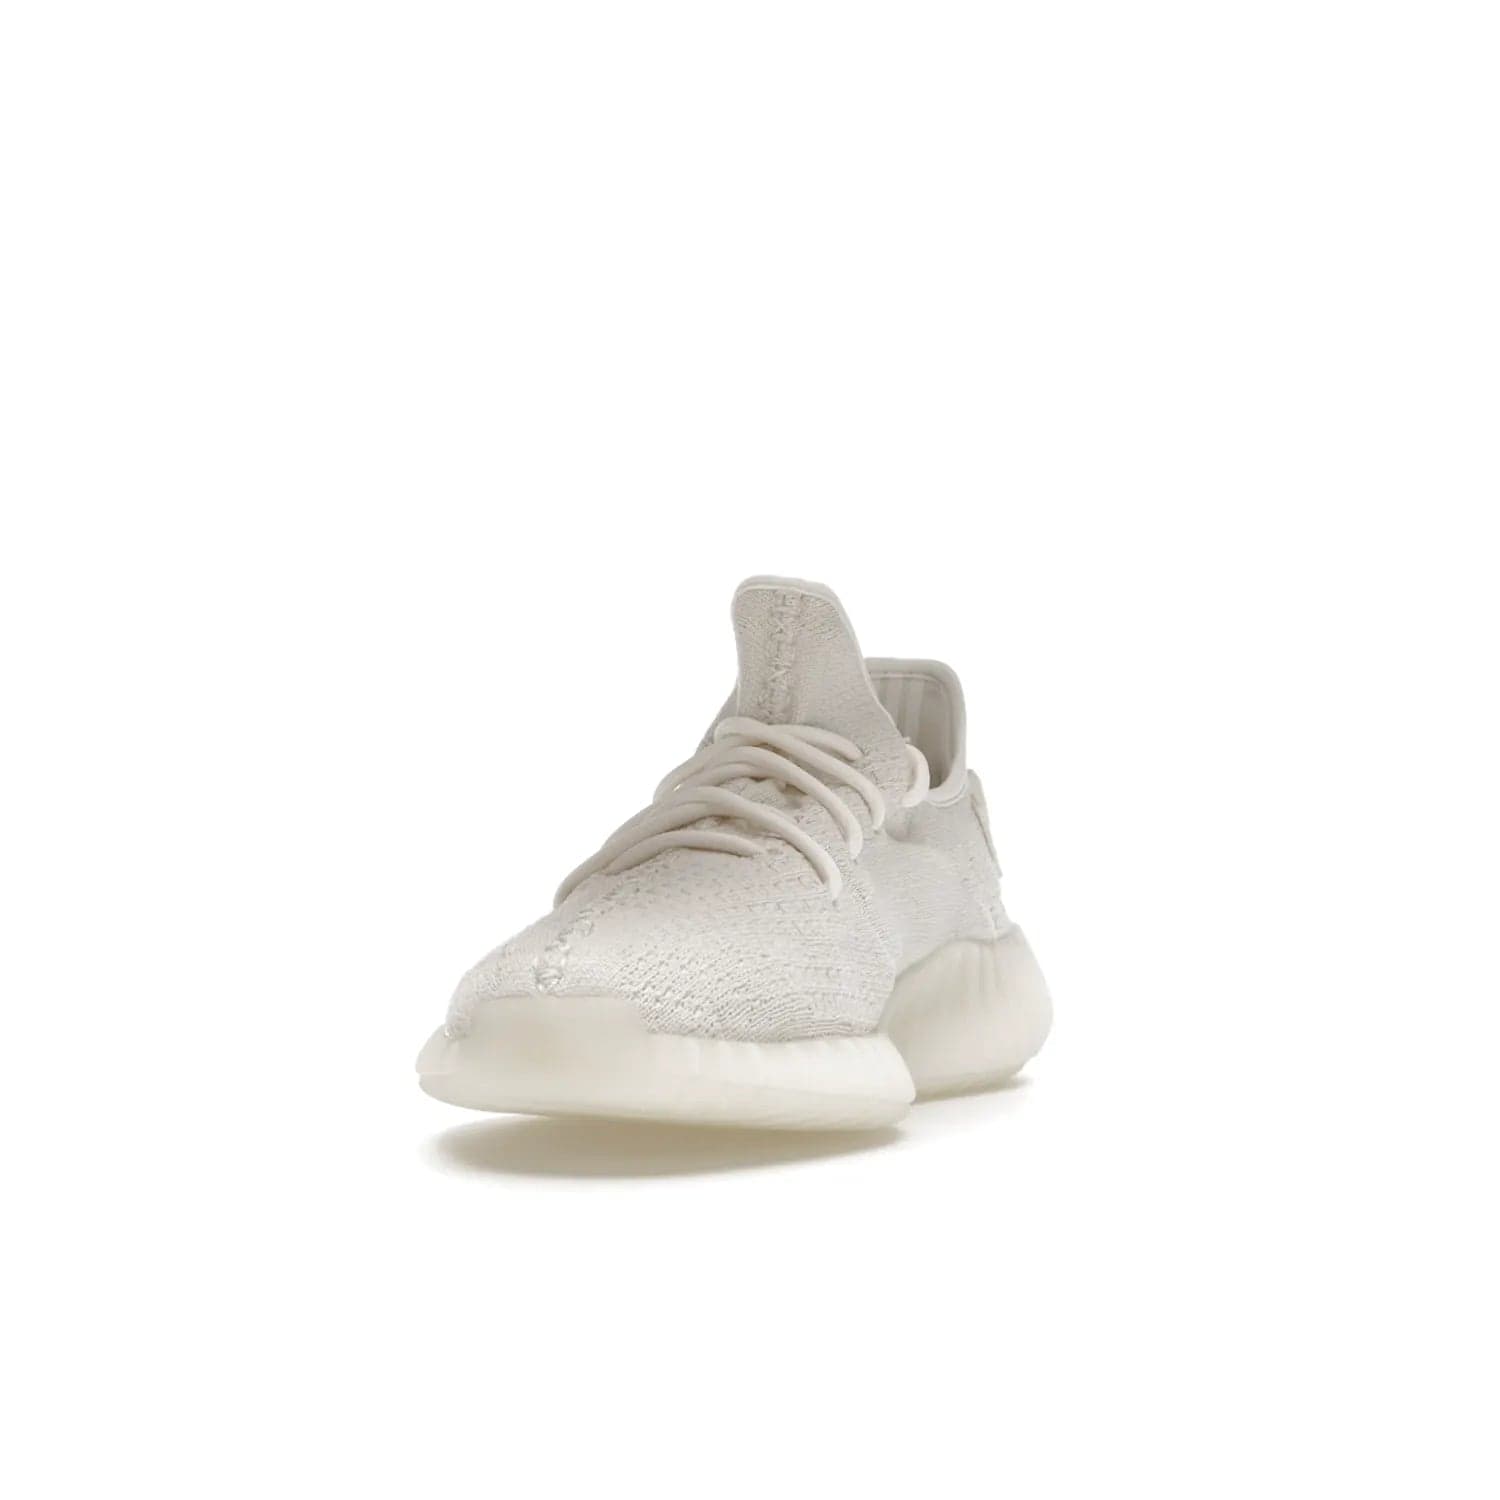 adidas Yeezy Boost 350 V2 Bone - Image 12 - Only at www.BallersClubKickz.com - Grab the stylish and comfortable adidas Yeezy Boost 350 V2 Bone in March 2022. This sneaker features a triple white Primeknit upper, mesh side stripes and canvas heel tabs, sitting atop a semi-translucent sole with Boost technology. Sure to keep your feet comfortable and stylish!